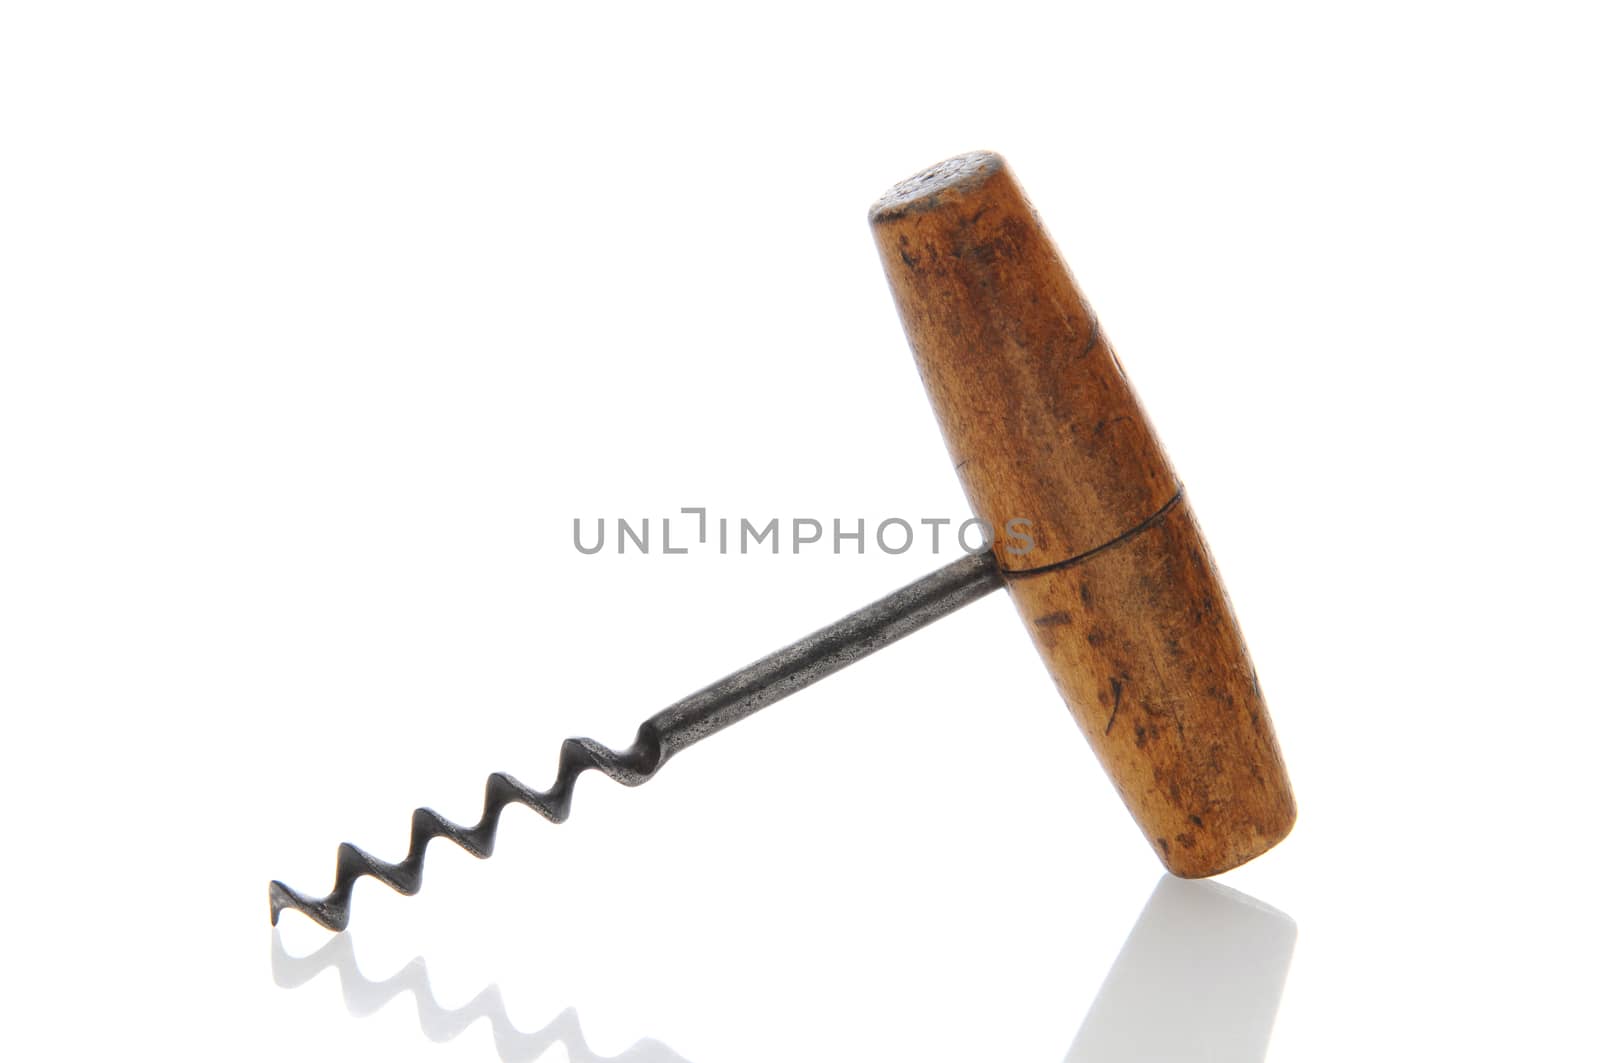 Closeup of an antique wooden handled corkscrew over a white background with reflection.